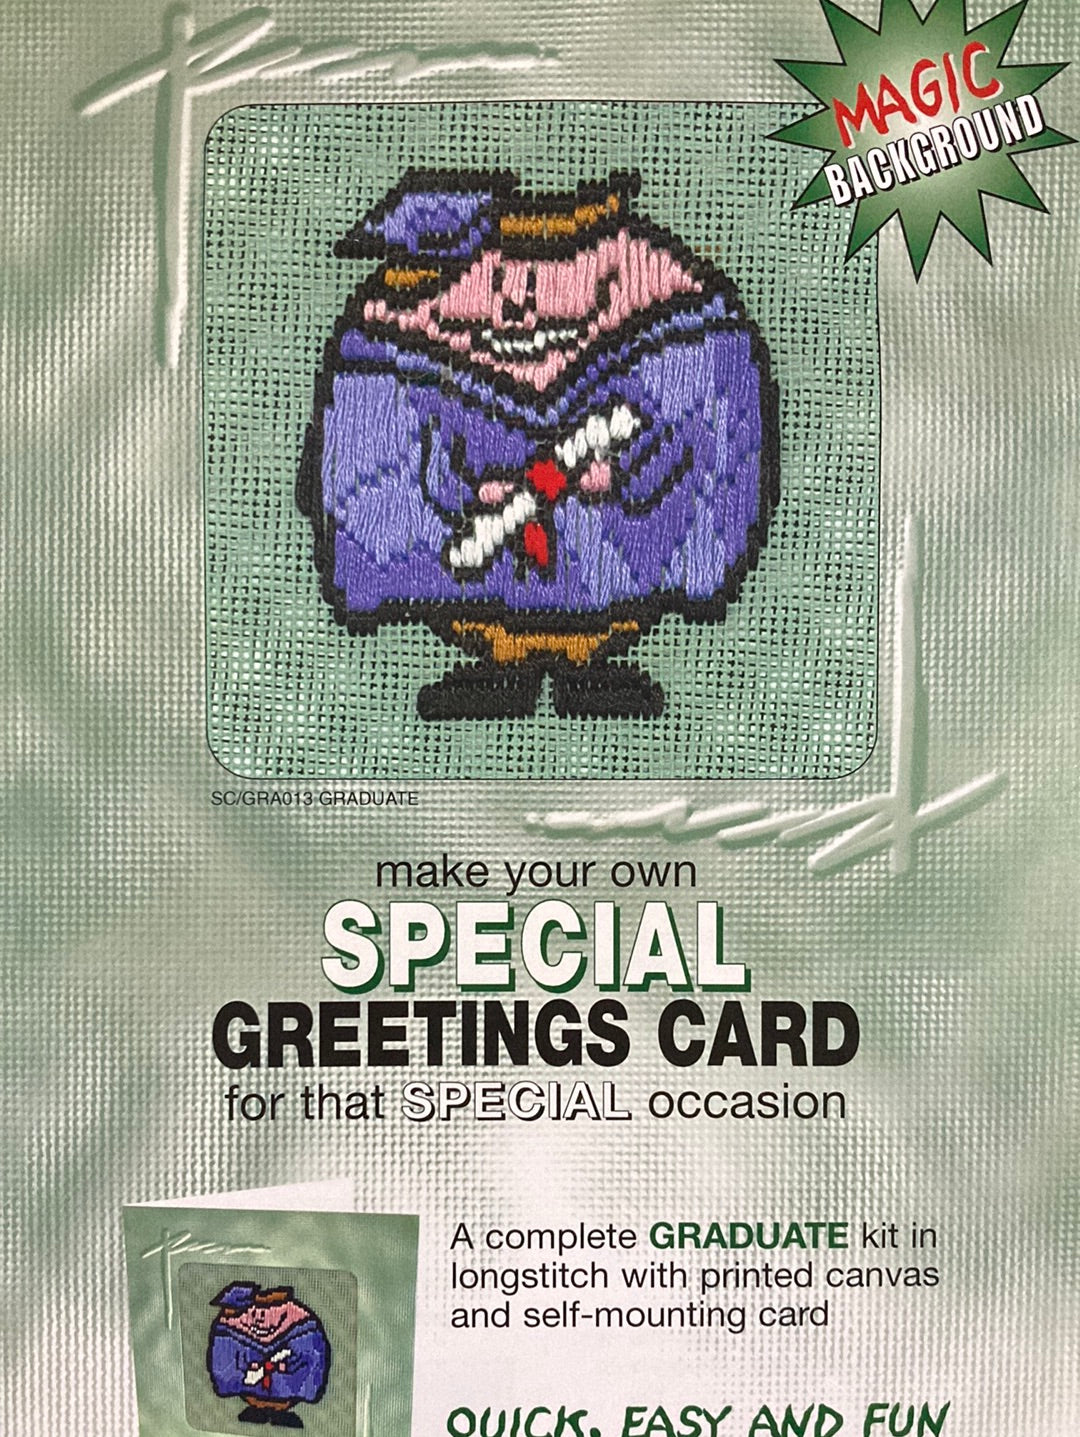 Make your own Special Greetings Card - various longstitch card kits